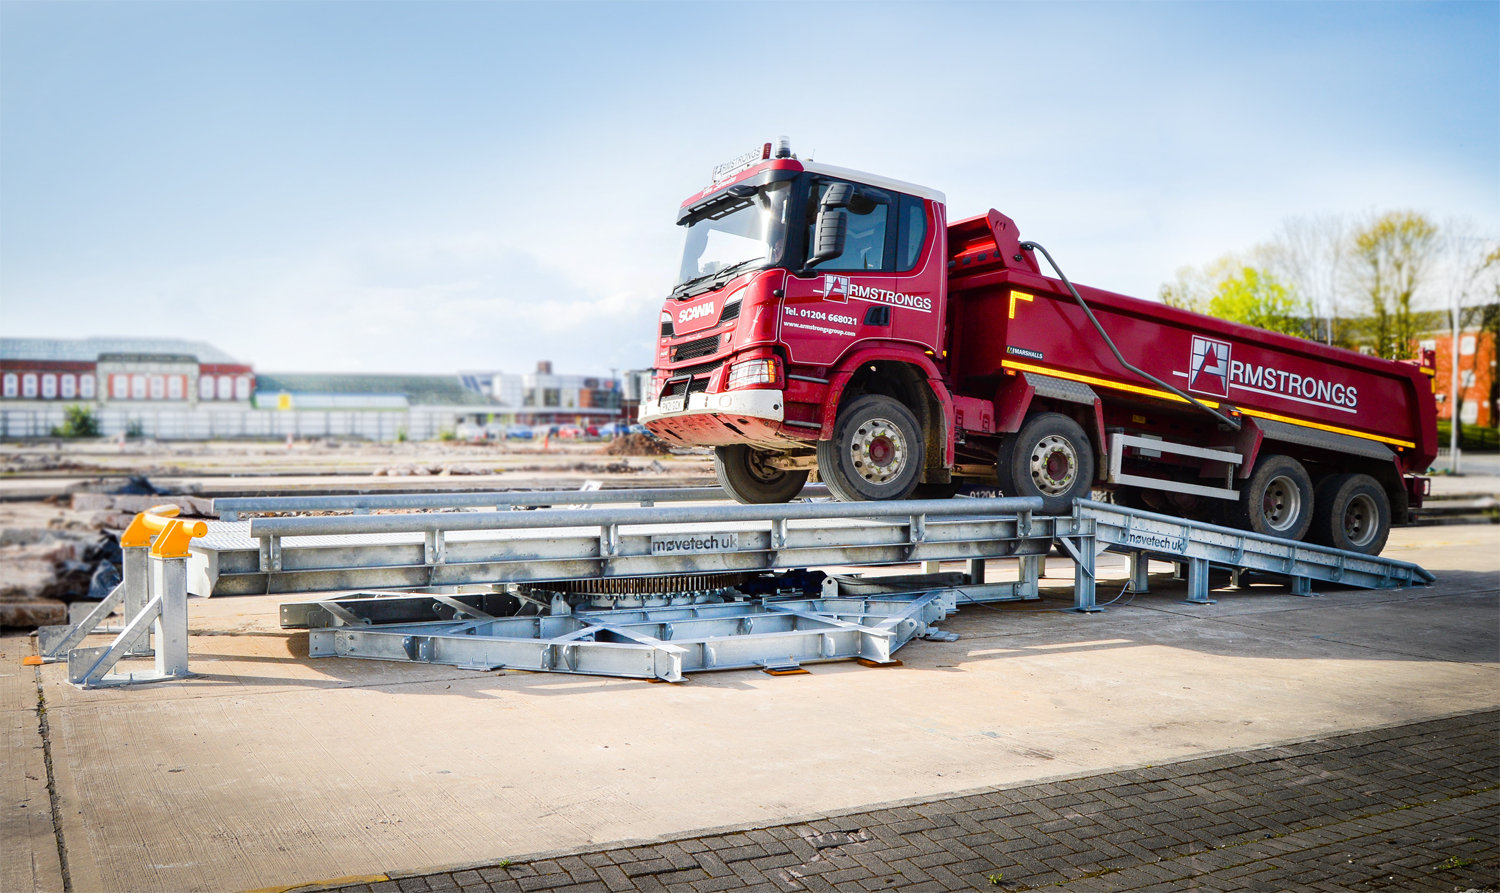 An in-depth look at Movetech UK’s new innovative Construction Site Turntable